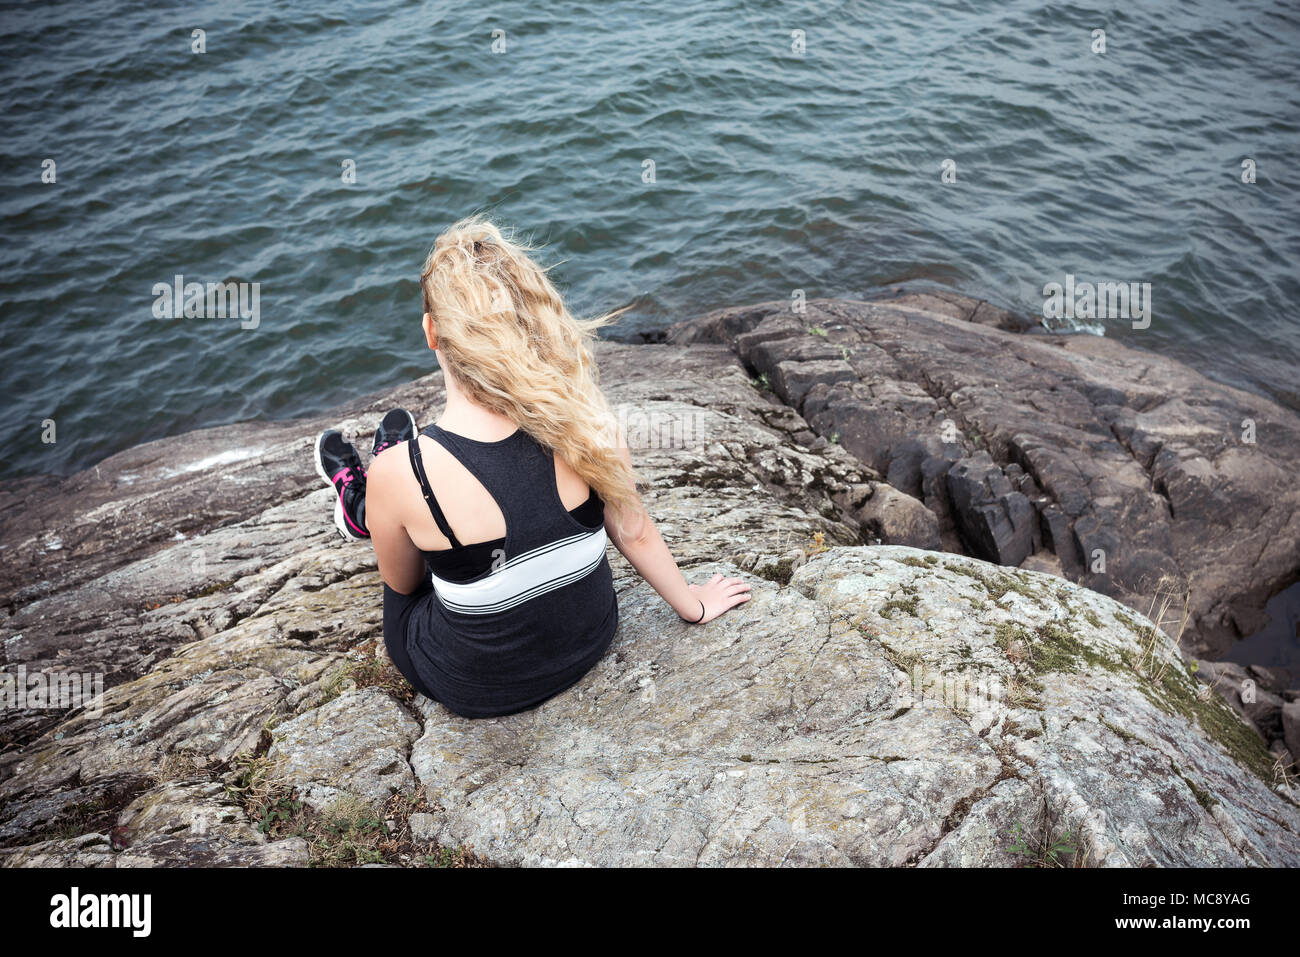 Rear view of a blond young woman sitting on a rock looking at view Stock Photo